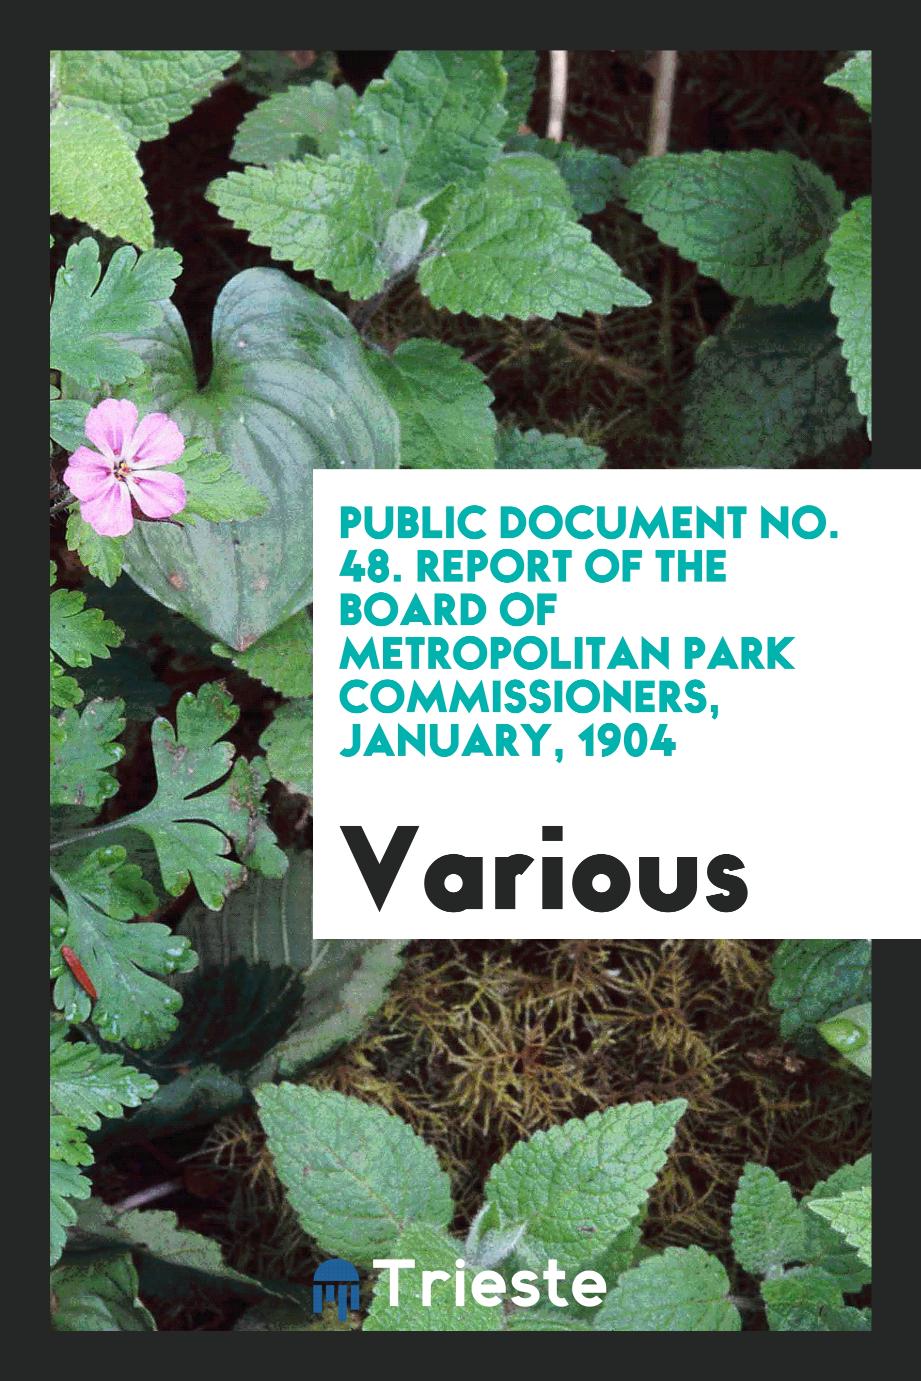 Public Document No. 48. Report of the Board of Metropolitan Park Commissioners, January, 1904